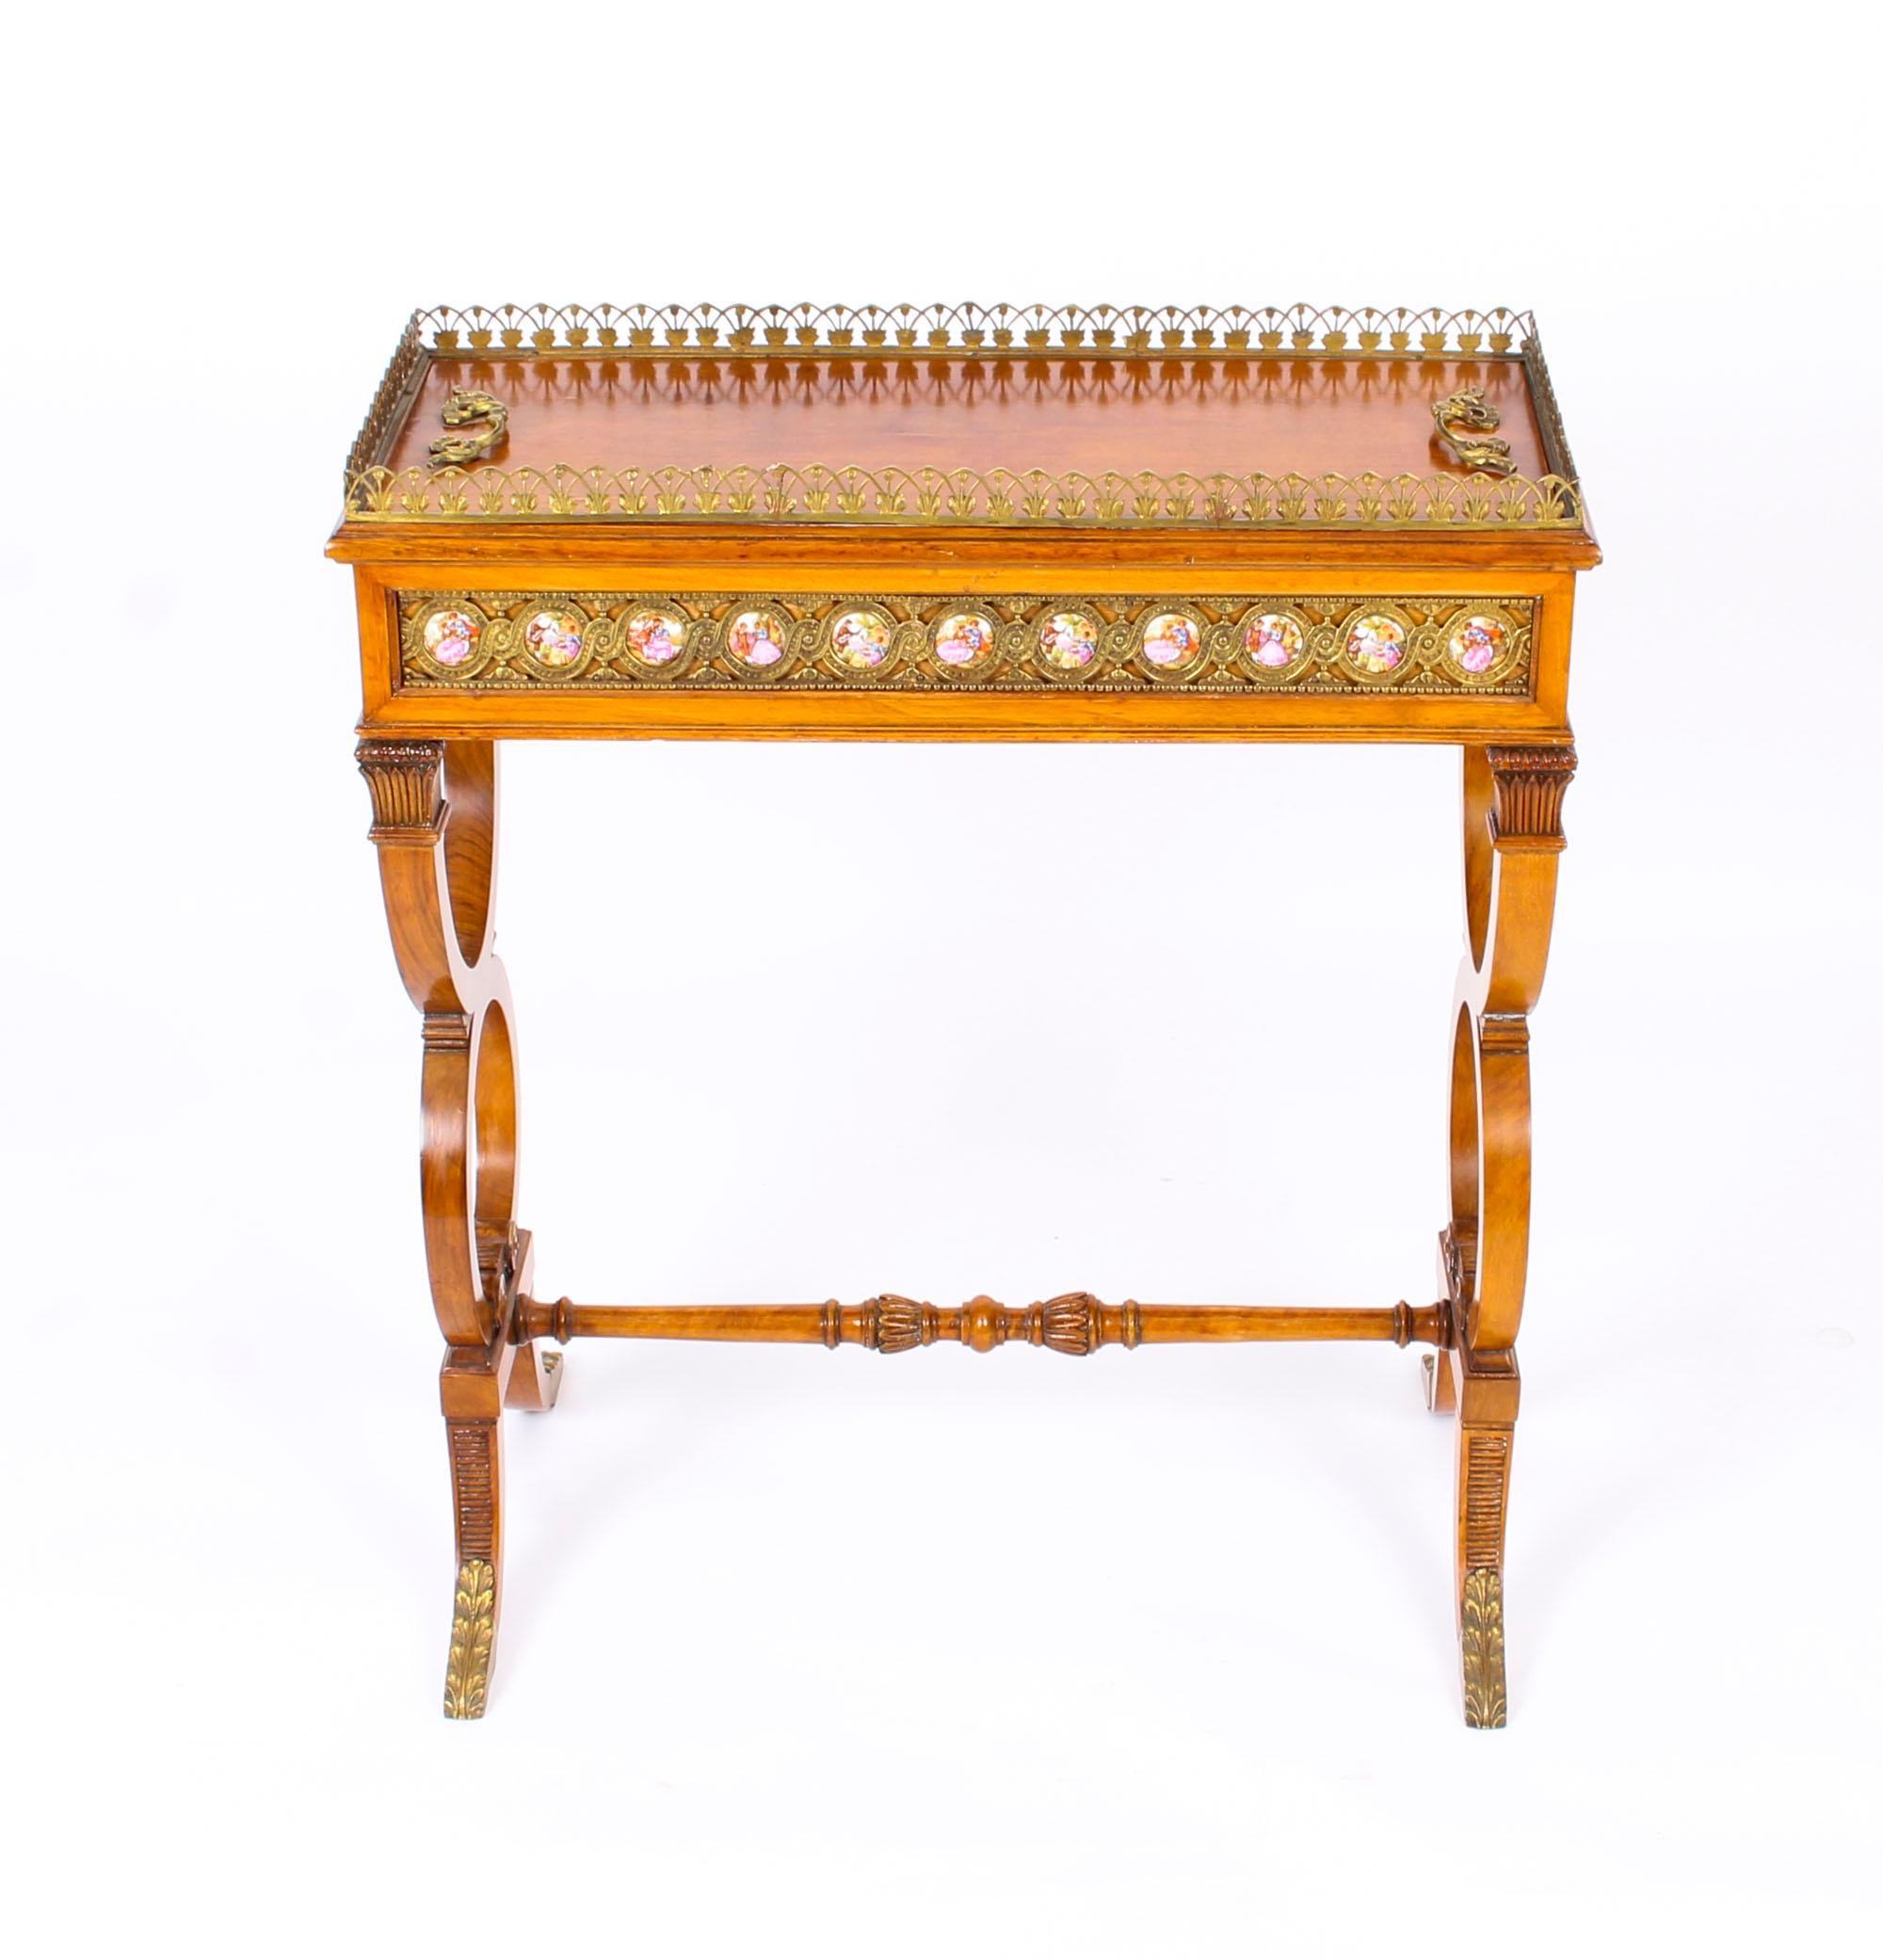 This is a truly splendid antique French ormolu and Sevres style porcelain mounted, walnut jardinière, circa 1870 in date.
 
This beautiful jardinière is rectangular in shape and features a superb pierced brass galleried top with a removable lid